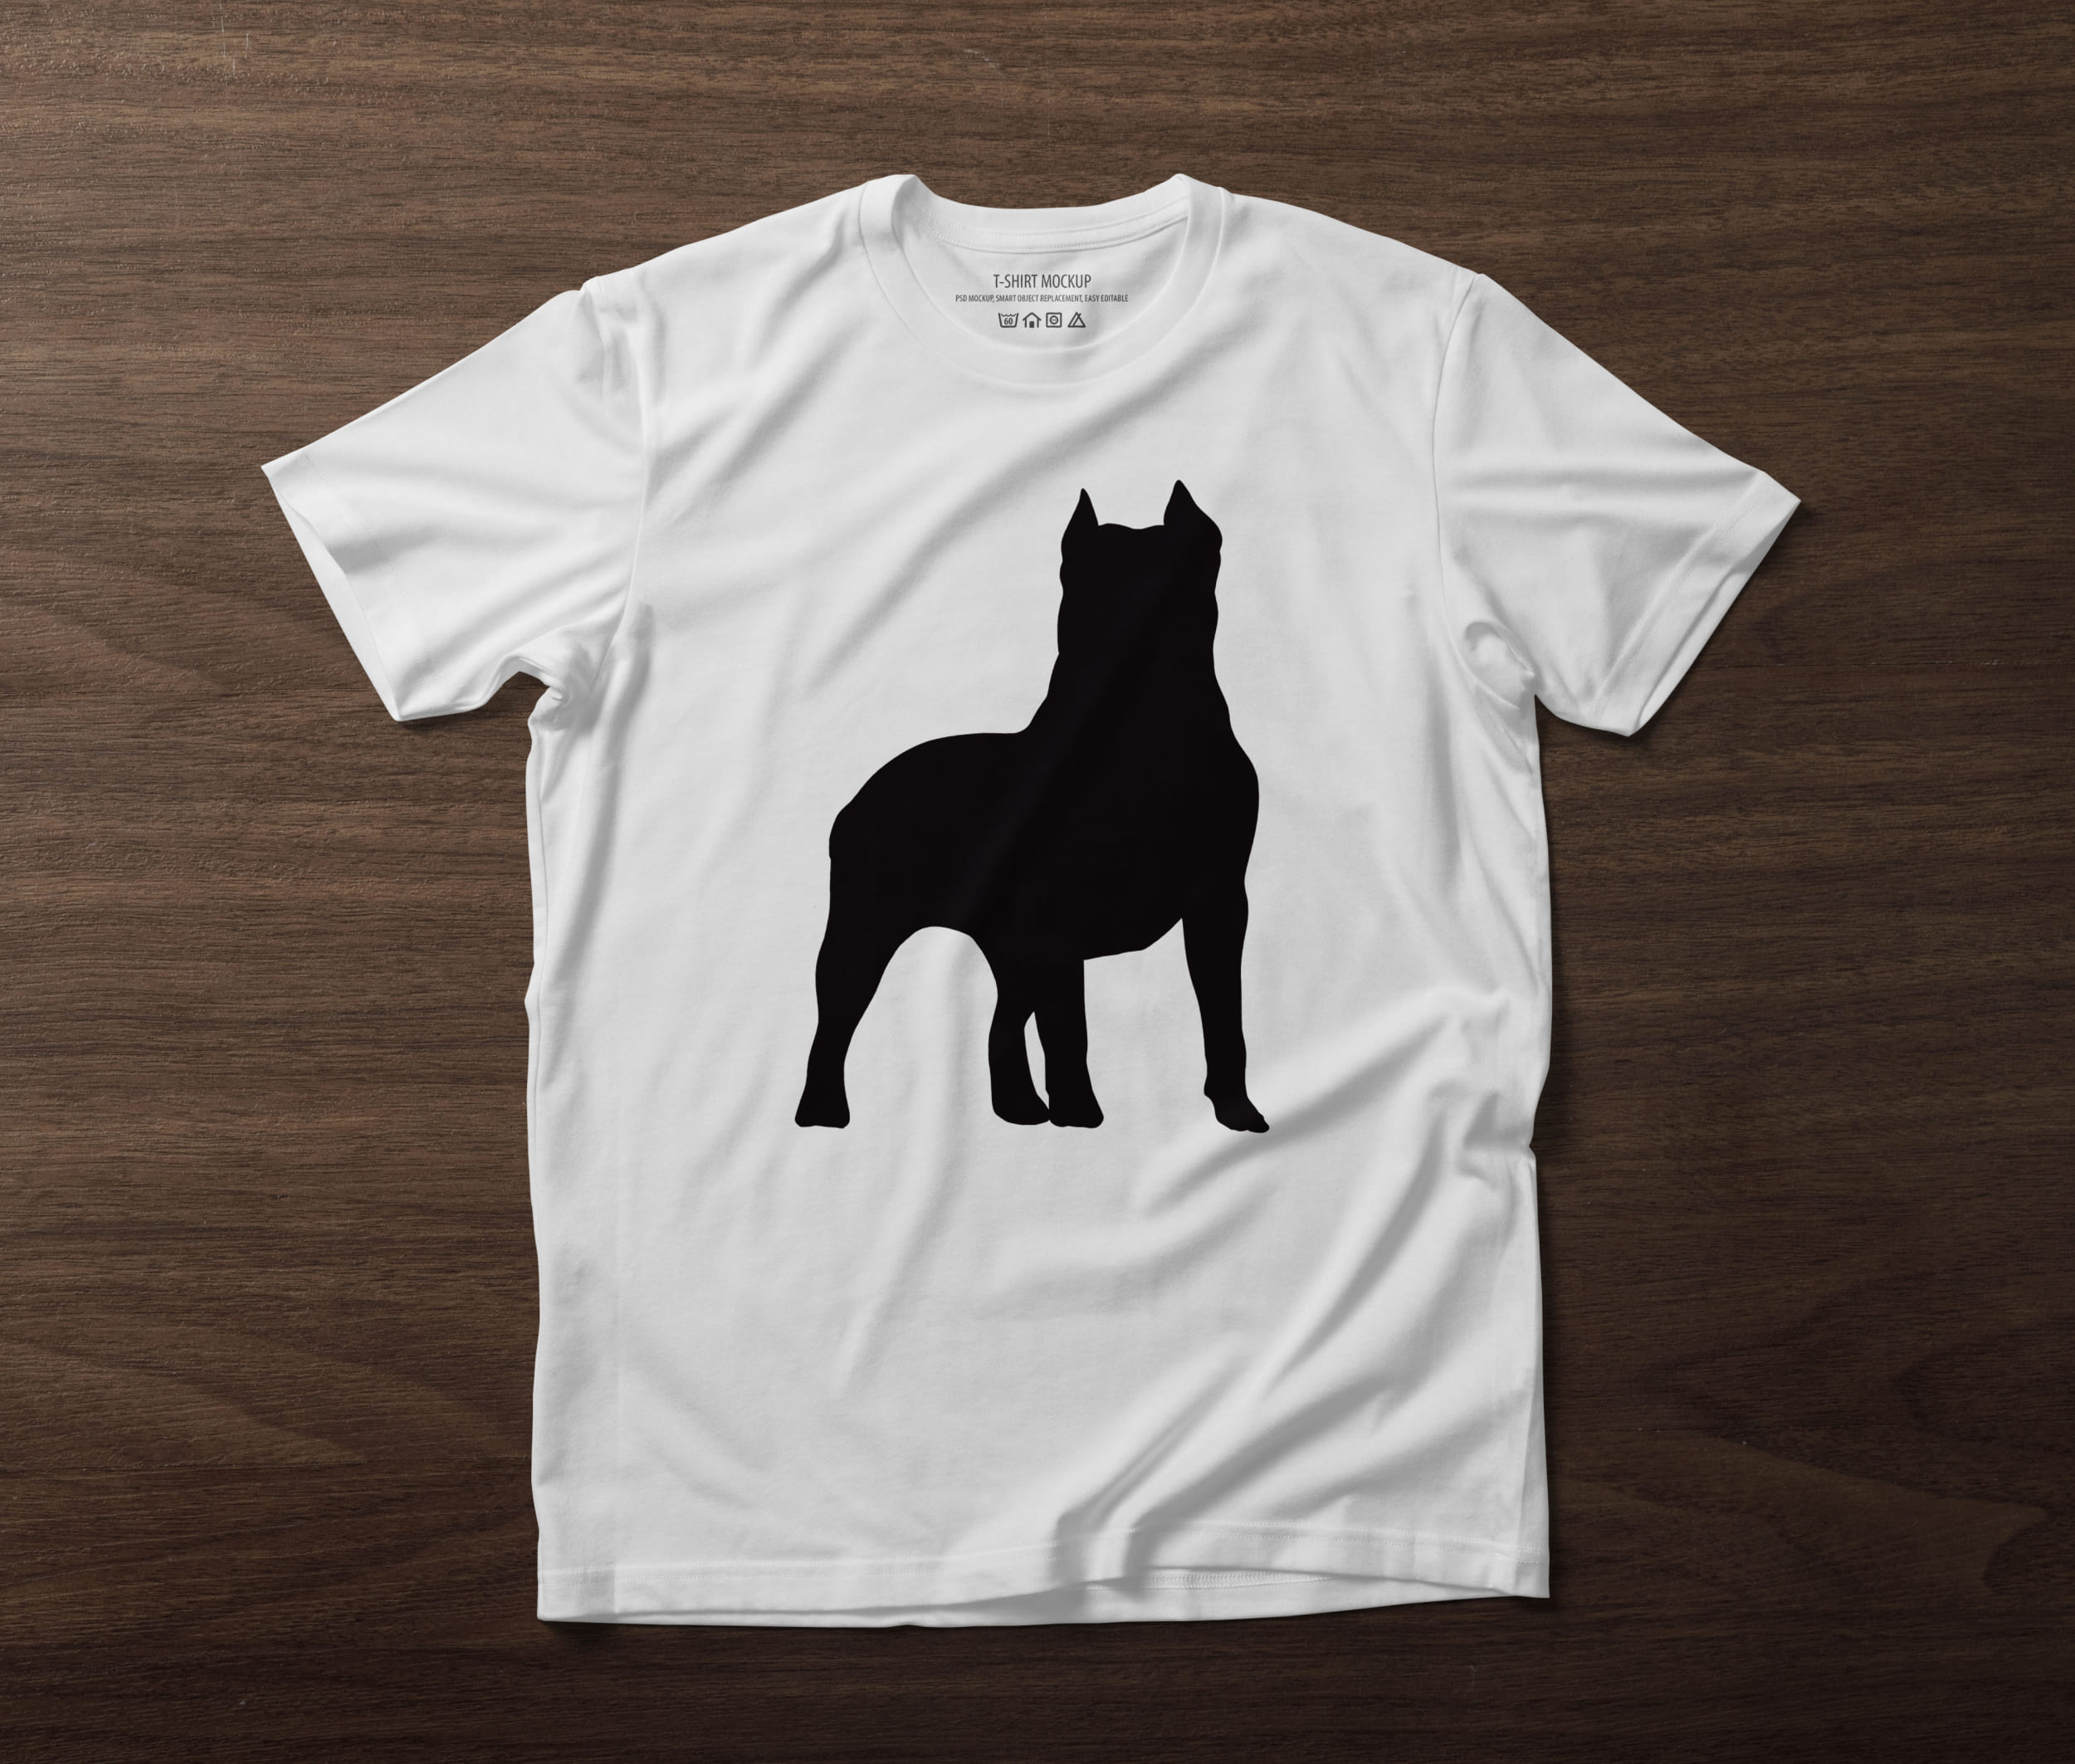 White T-shirt with a black silhouette of a pitbull on the table.